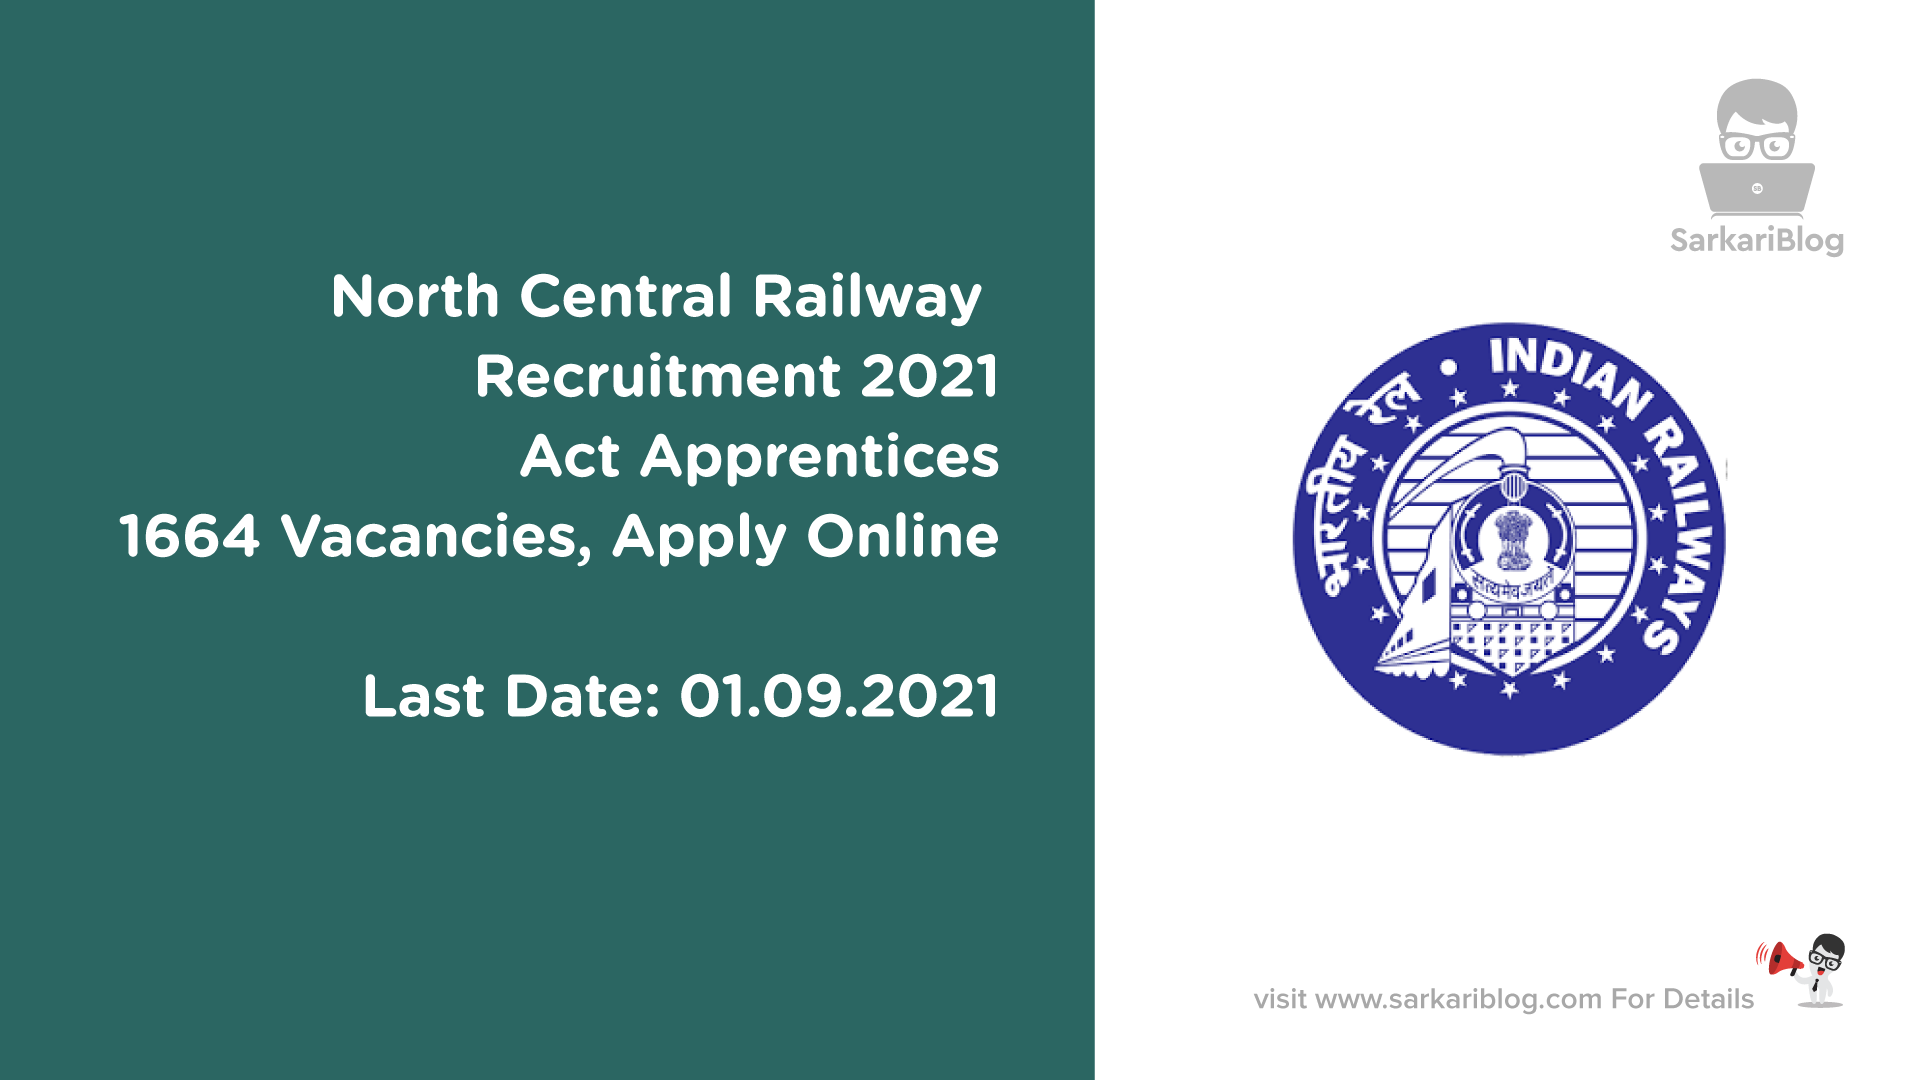 North Central Railway Recruitment 2021 Act Apprentices, 1664 Vacancies, Apply Online